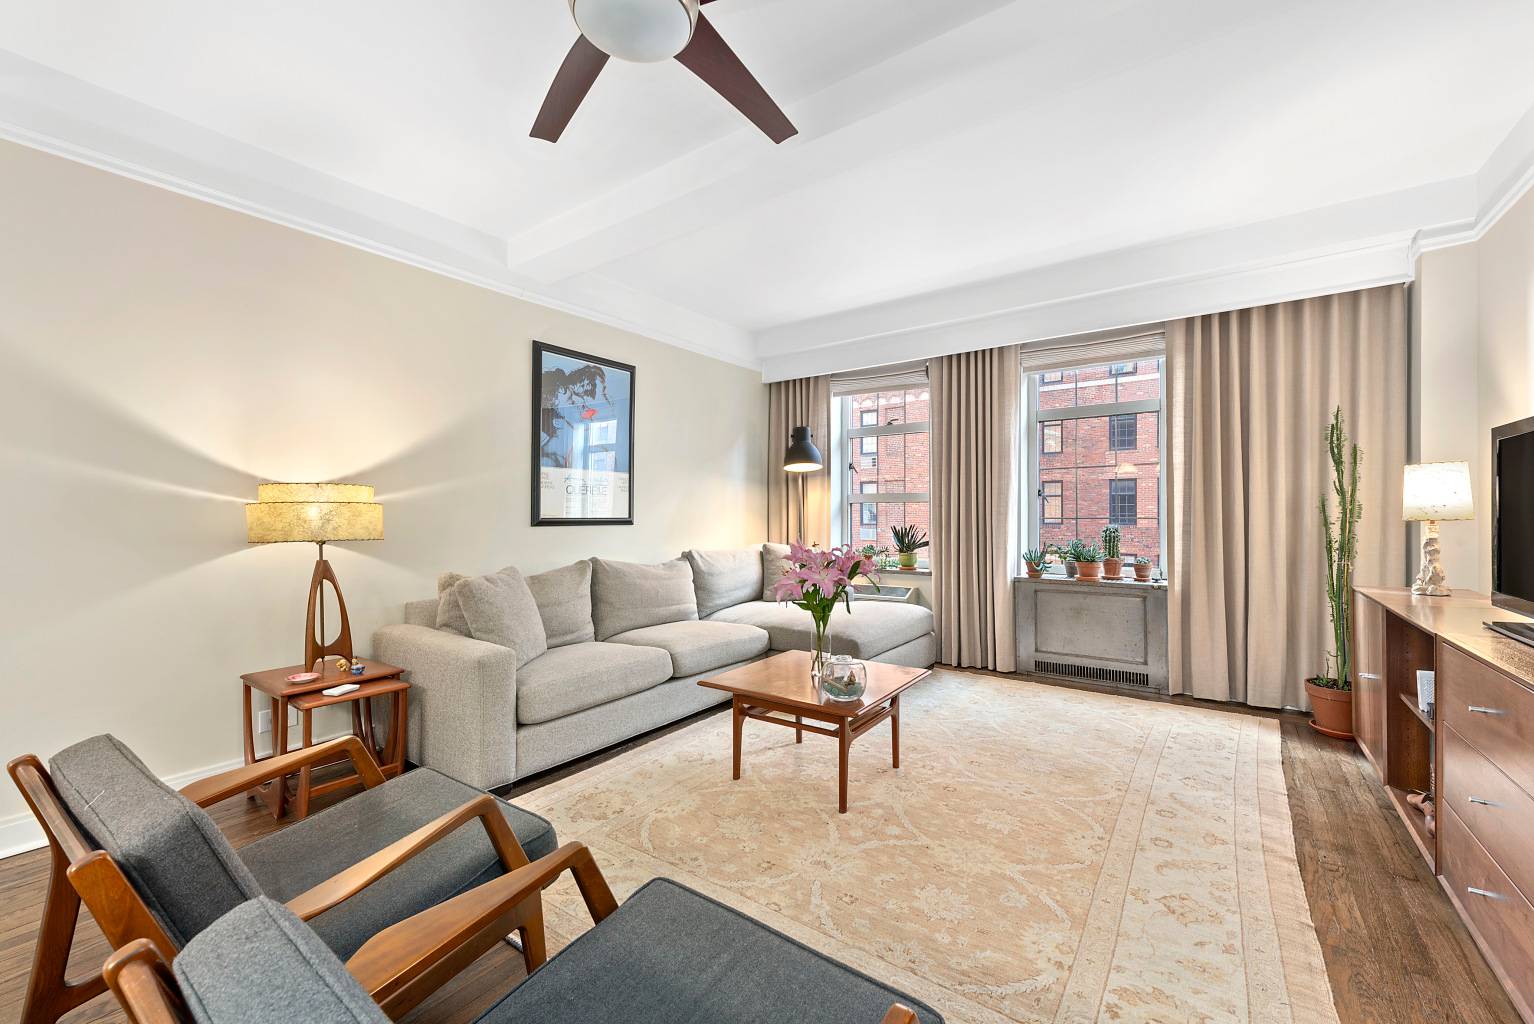 Welcome to Apartment 12J at 410 West 24th Street, London Terrace Towers.